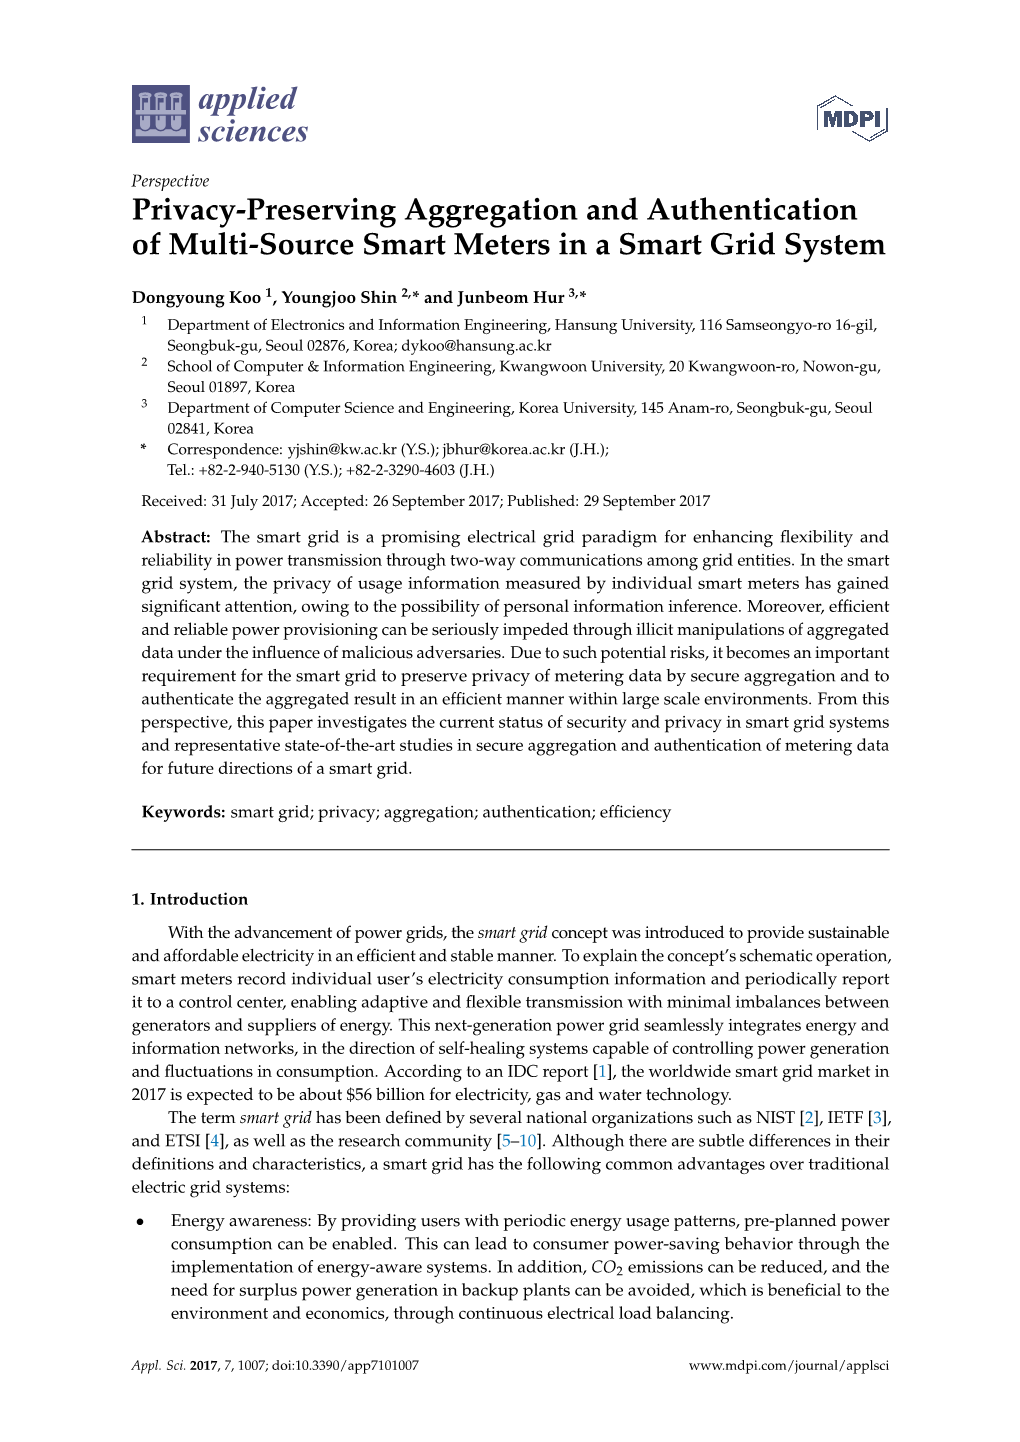 Privacy-Preserving Aggregation and Authentication of Multi-Source Smart Meters in a Smart Grid System